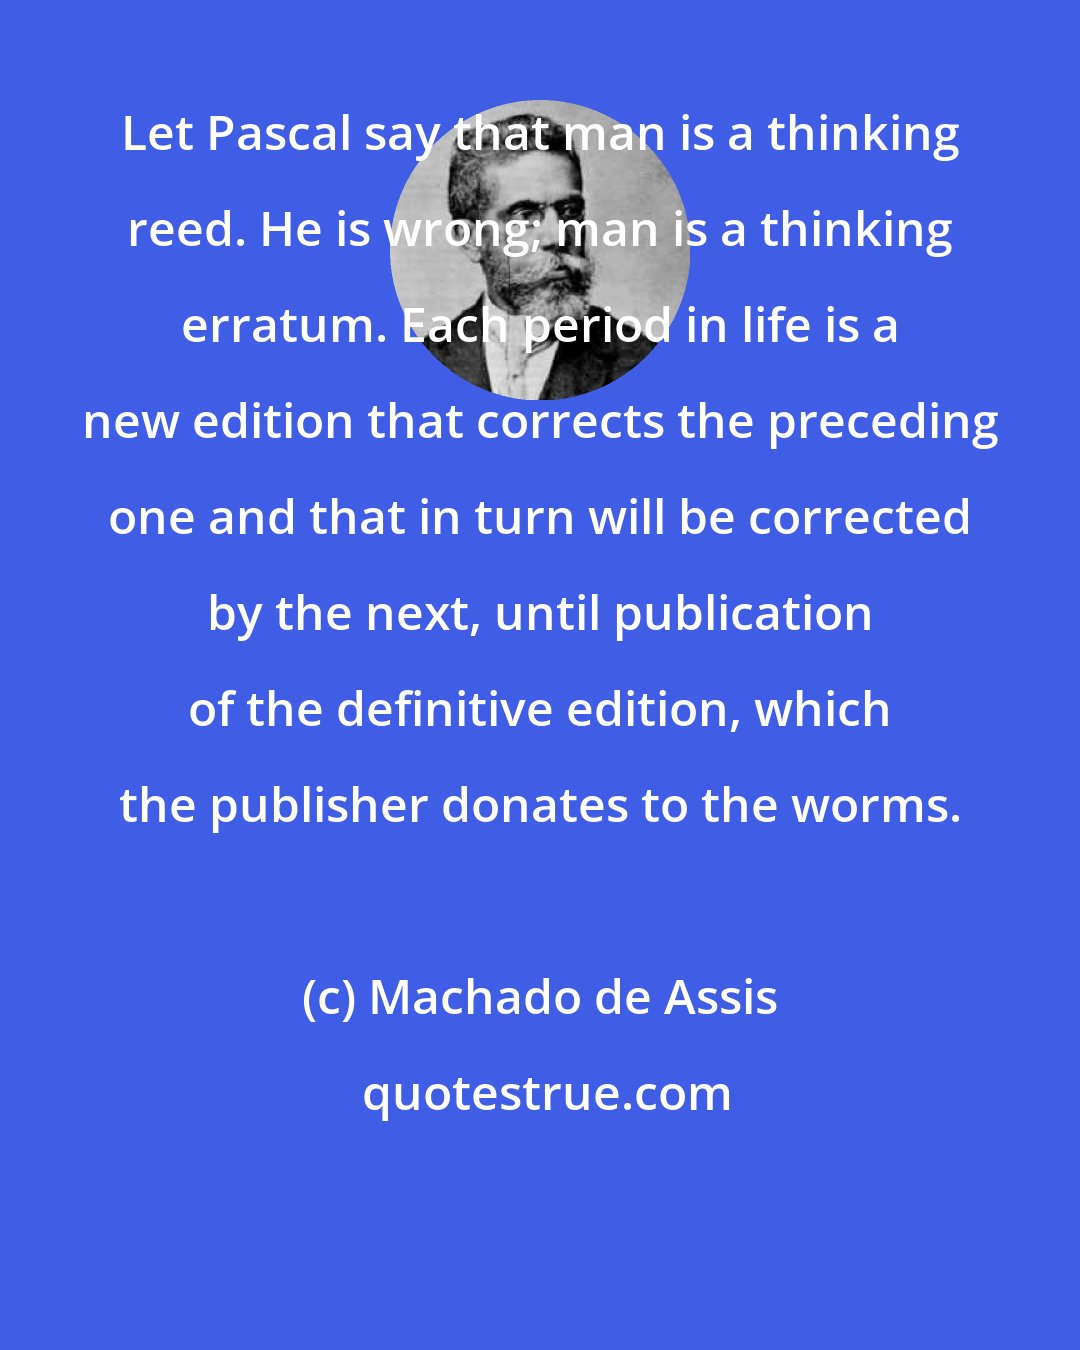 Machado de Assis: Let Pascal say that man is a thinking reed. He is wrong; man is a thinking erratum. Each period in life is a new edition that corrects the preceding one and that in turn will be corrected by the next, until publication of the definitive edition, which the publisher donates to the worms.